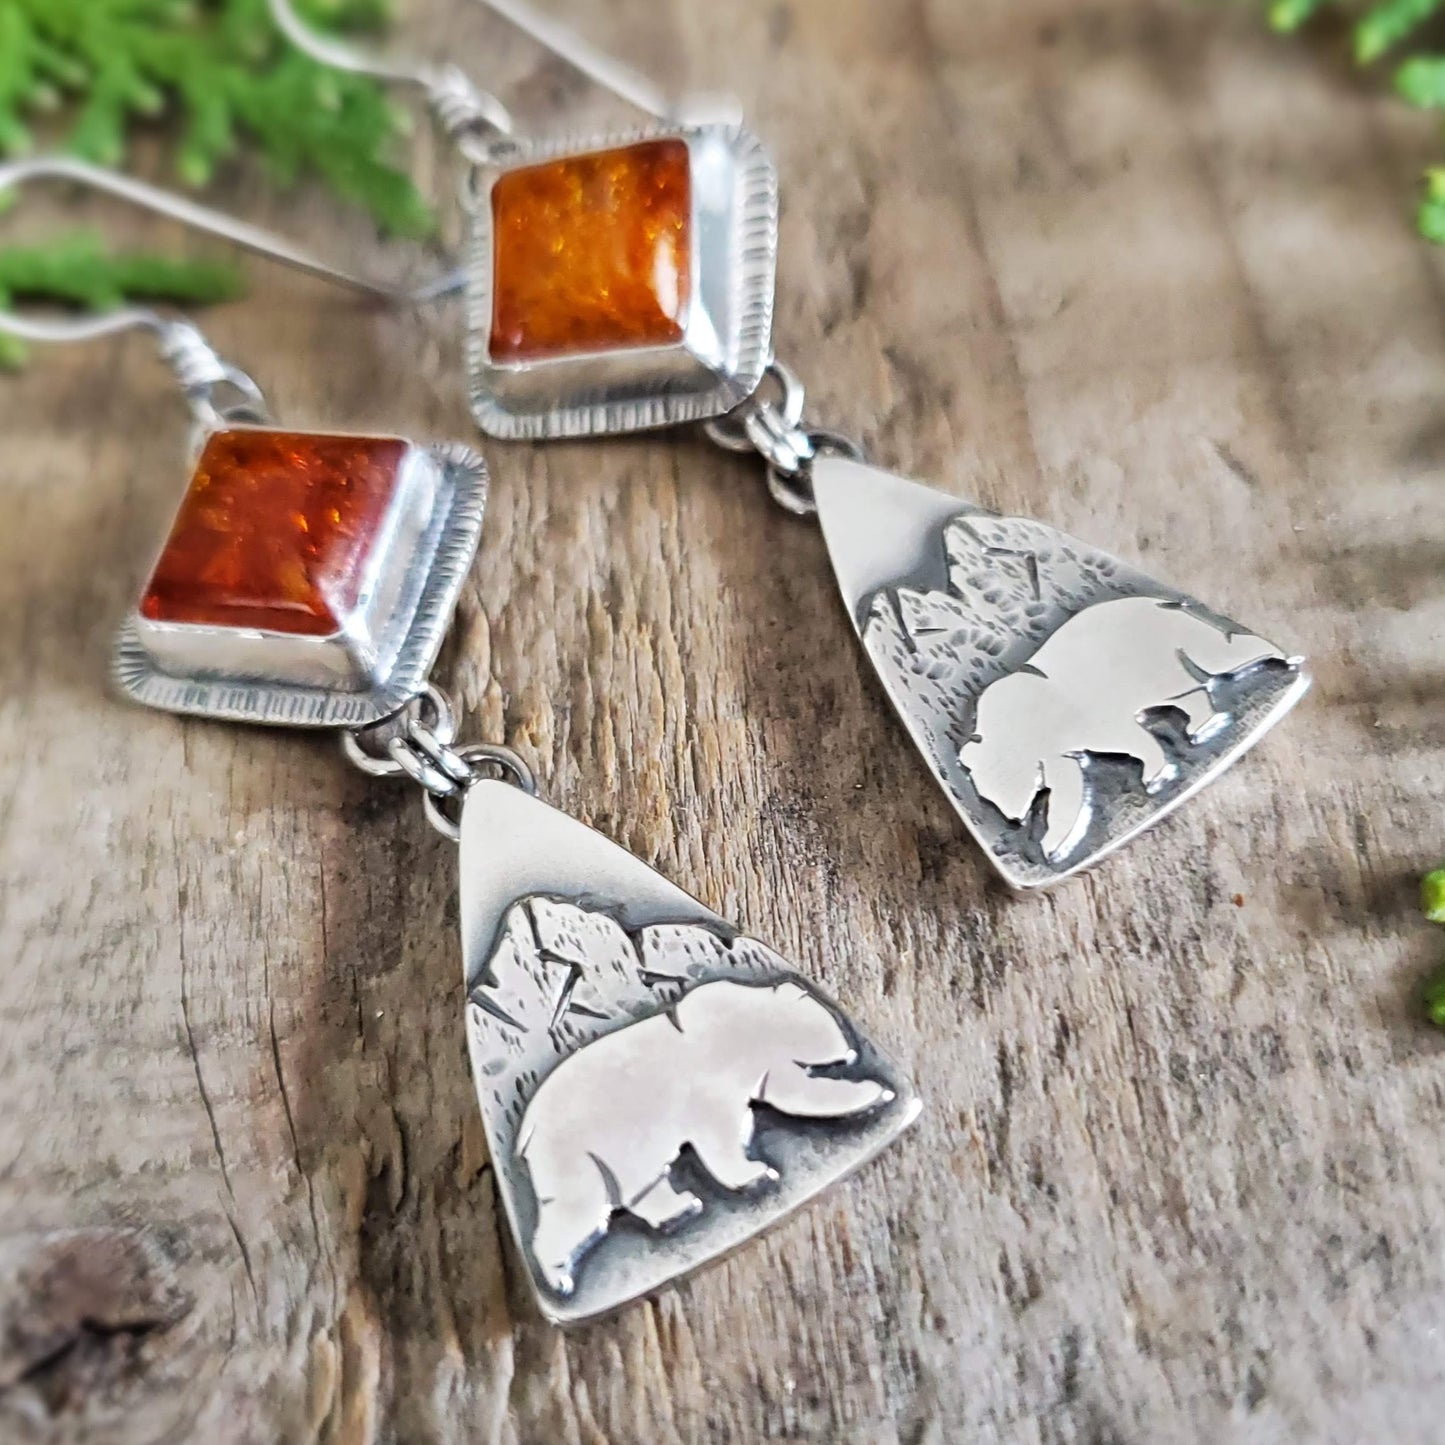 Baltic Amber Earrings Featuring Mountains and Bears